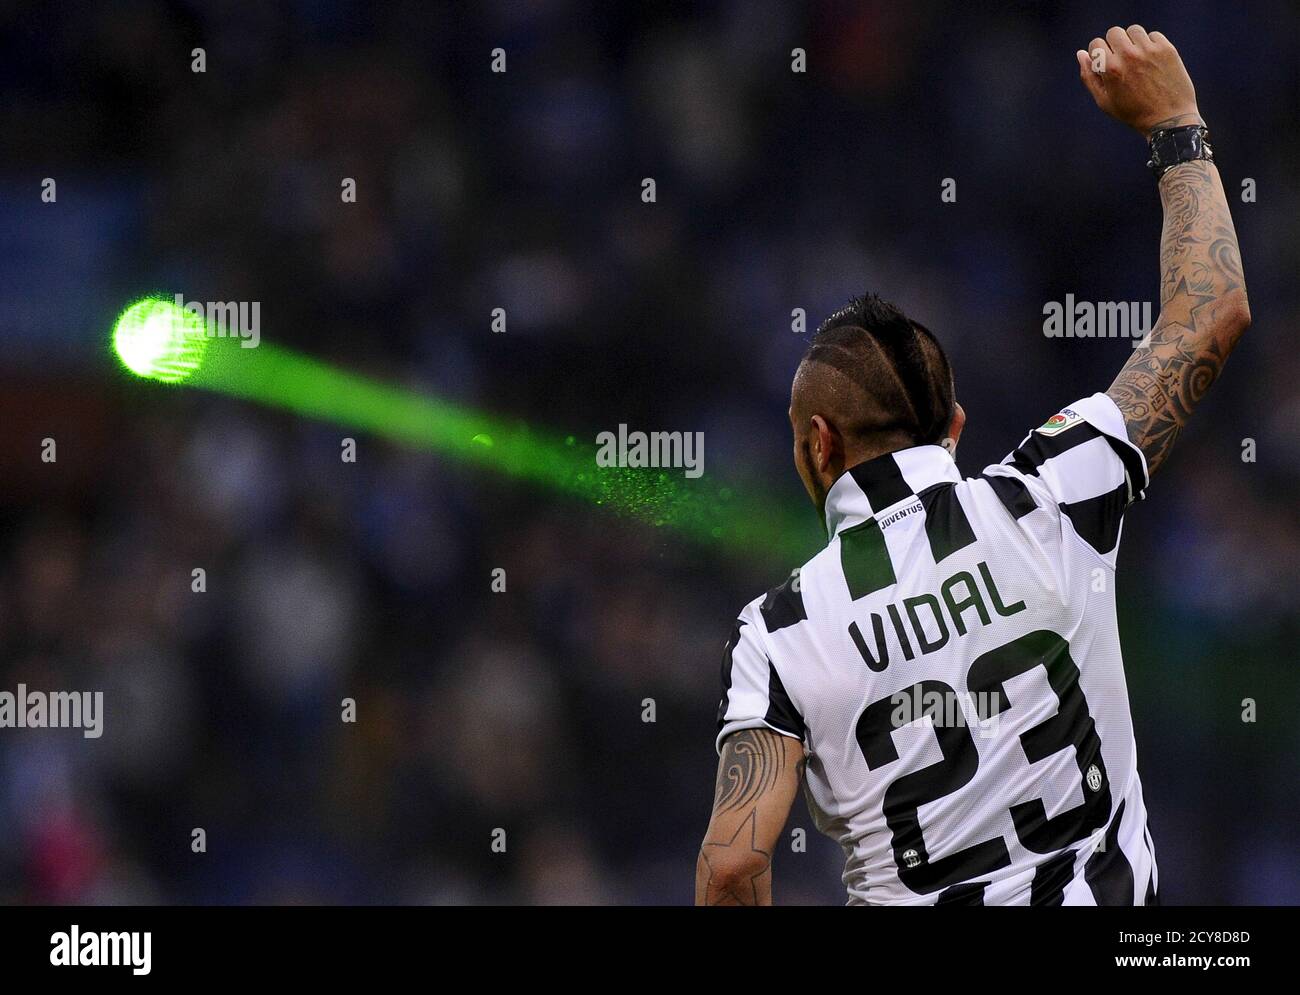 Juventus' Arturo Vidal celebrates at the end of their Serie A soccer match  against Sampdoria at the Marassi stadium in Genoa, Italy, May 2, 2015.  Juventus won a fourth successive Serie A